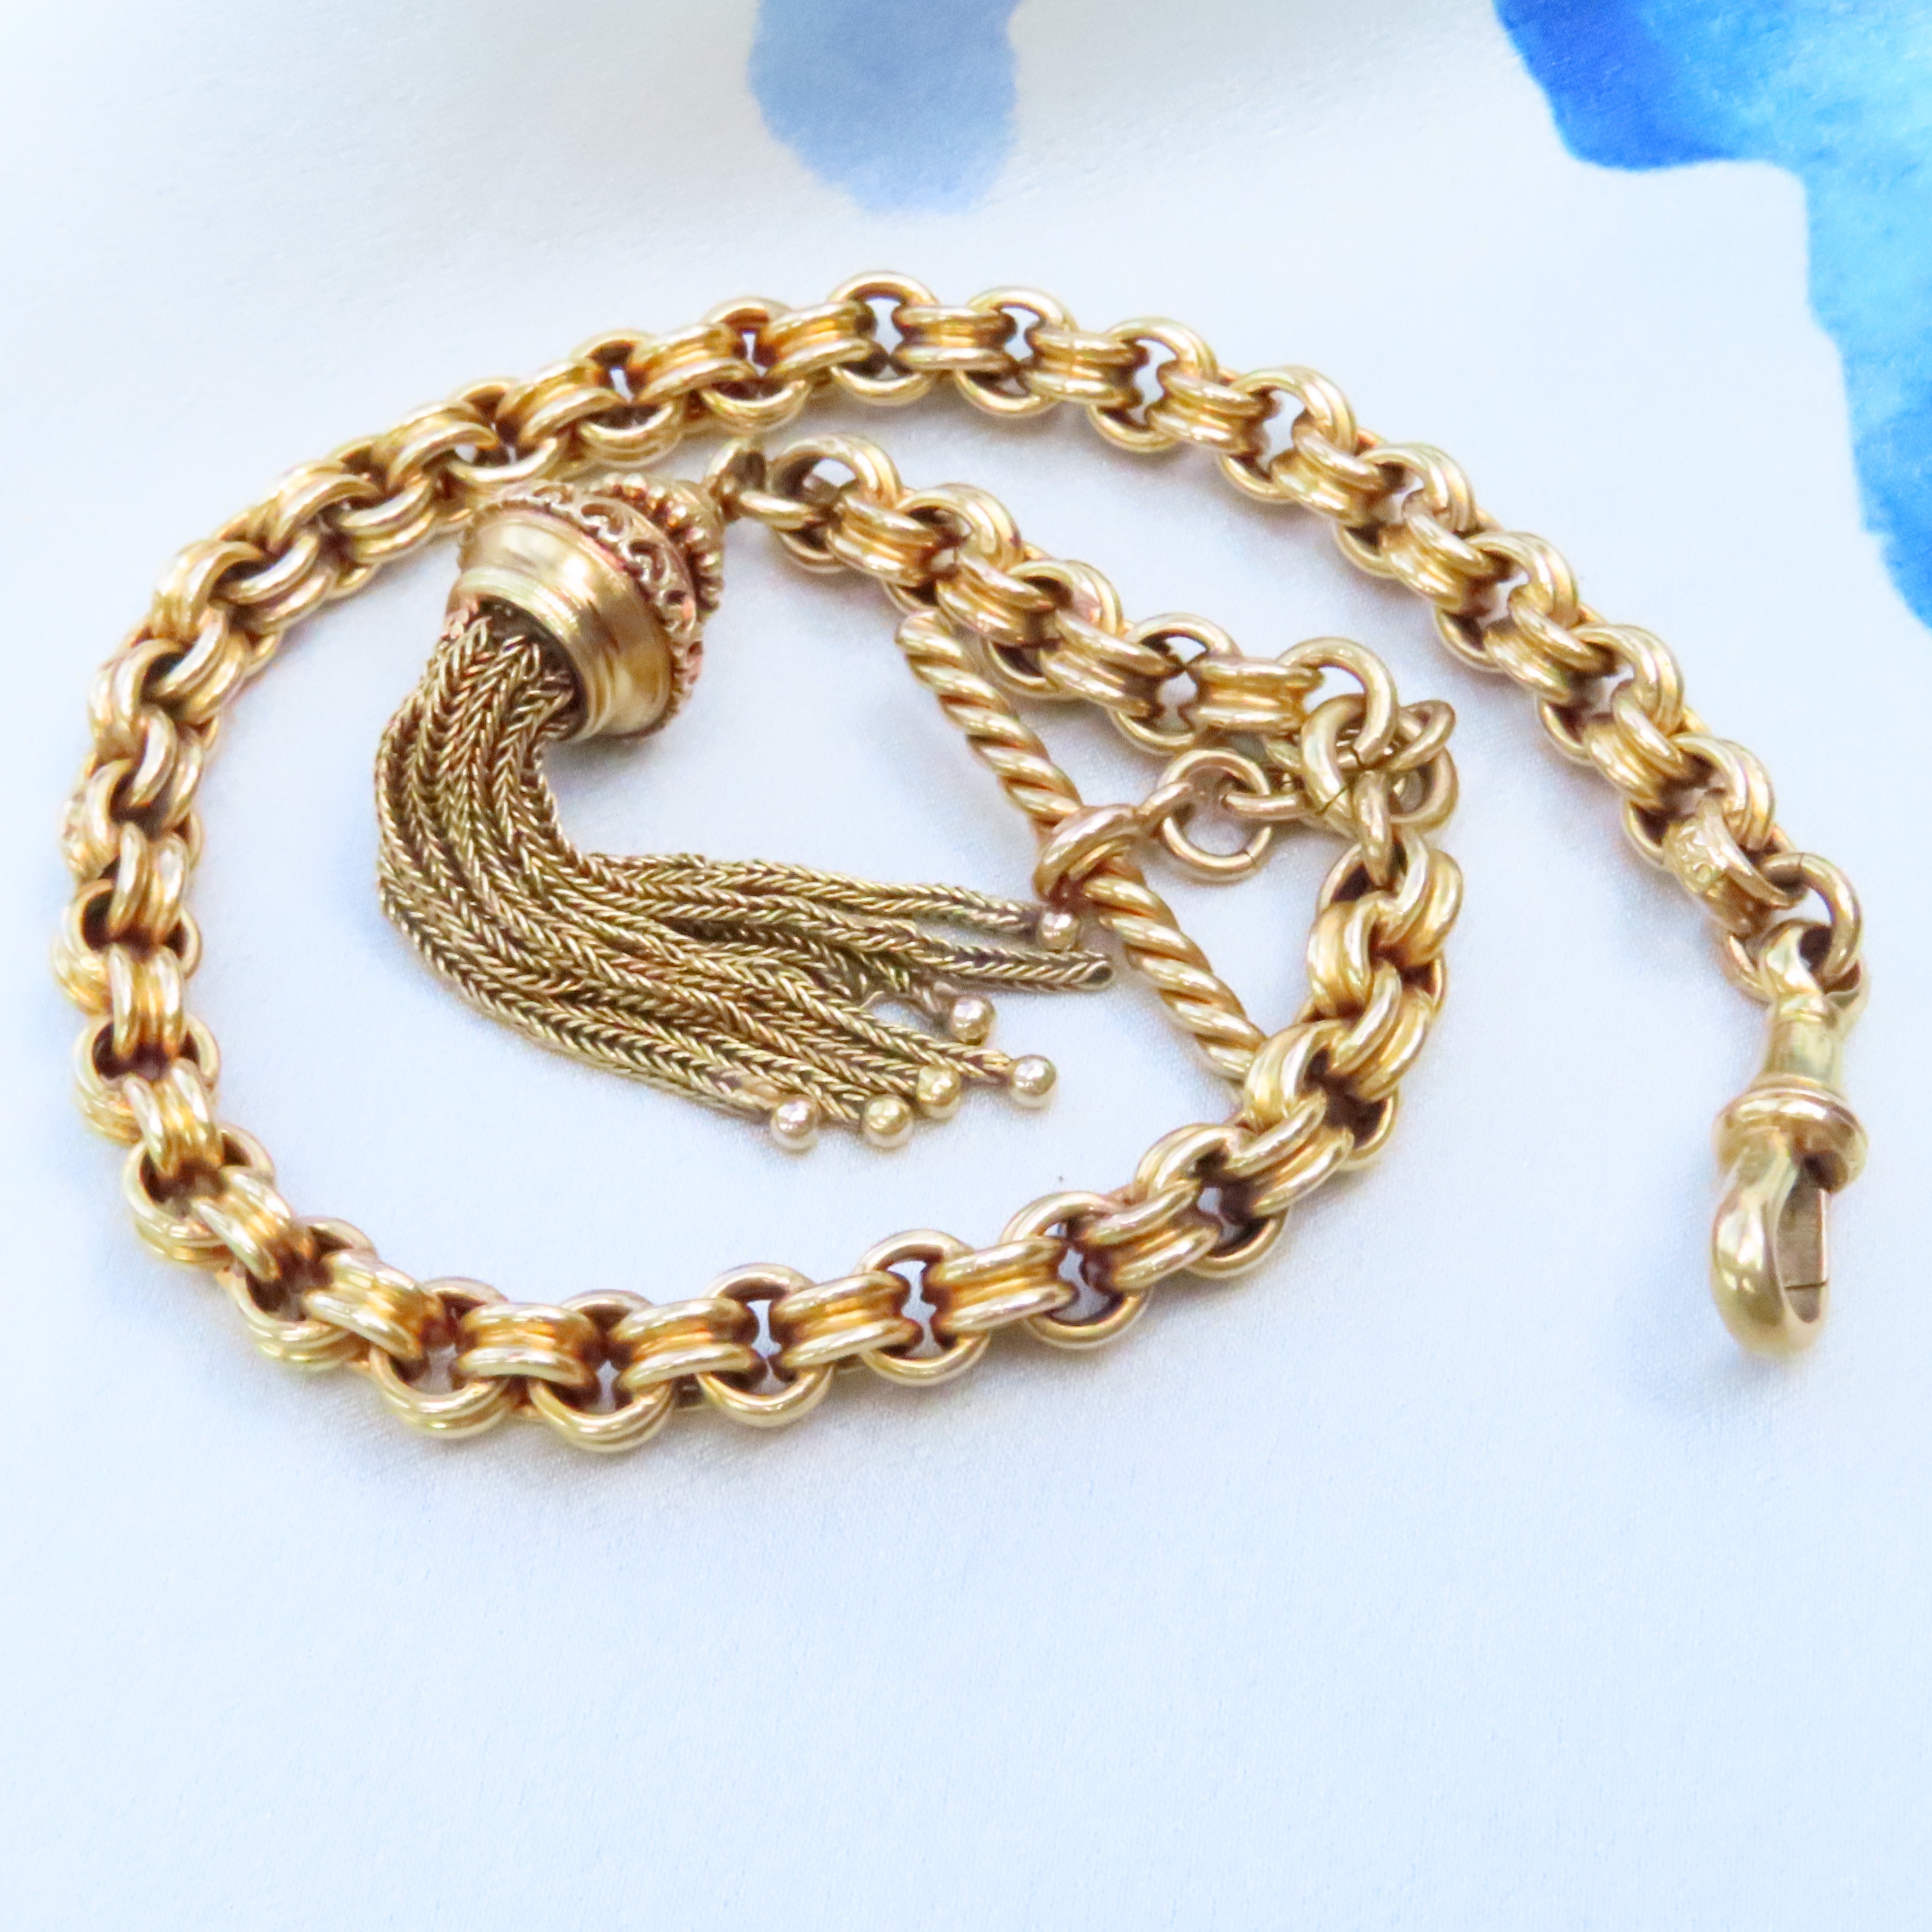 15ct albertina chain bracelet with tassel and t bar